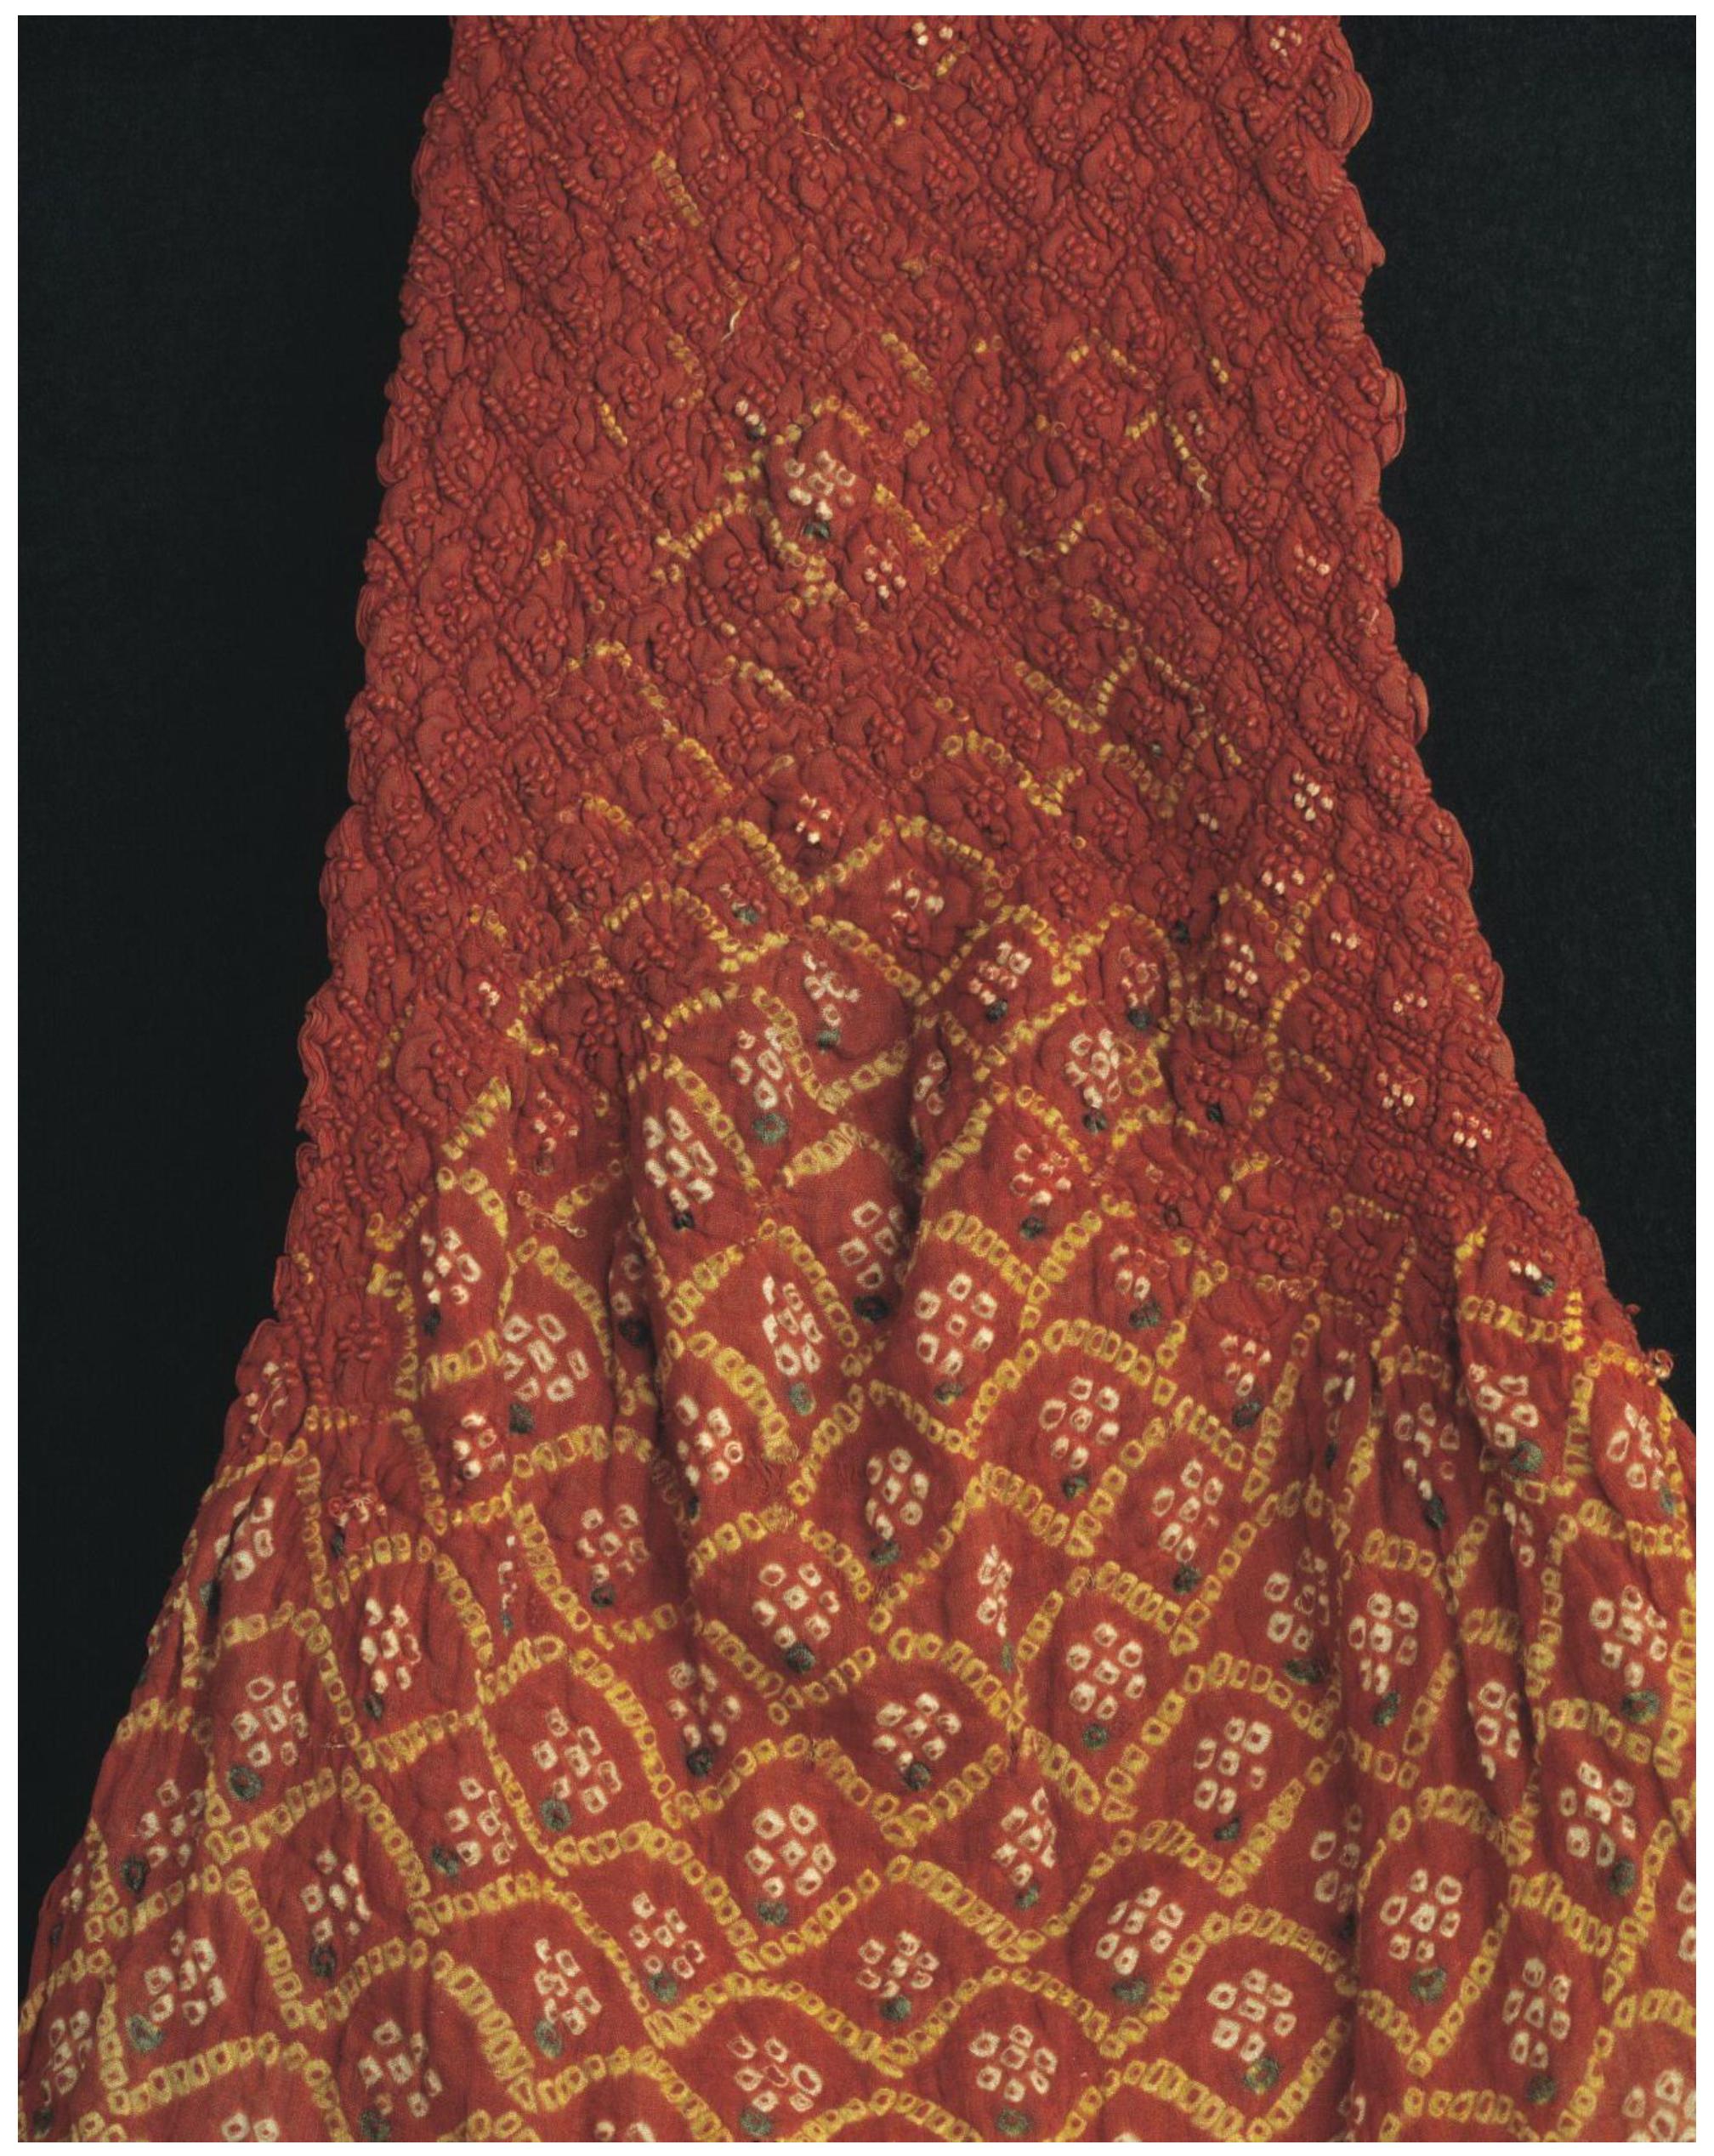 Religions | Free Full-Text | Dyeing the Springtime: The Art and Poetry of  Fleeting Textile Colors in Medieval and Early Modern South Asia